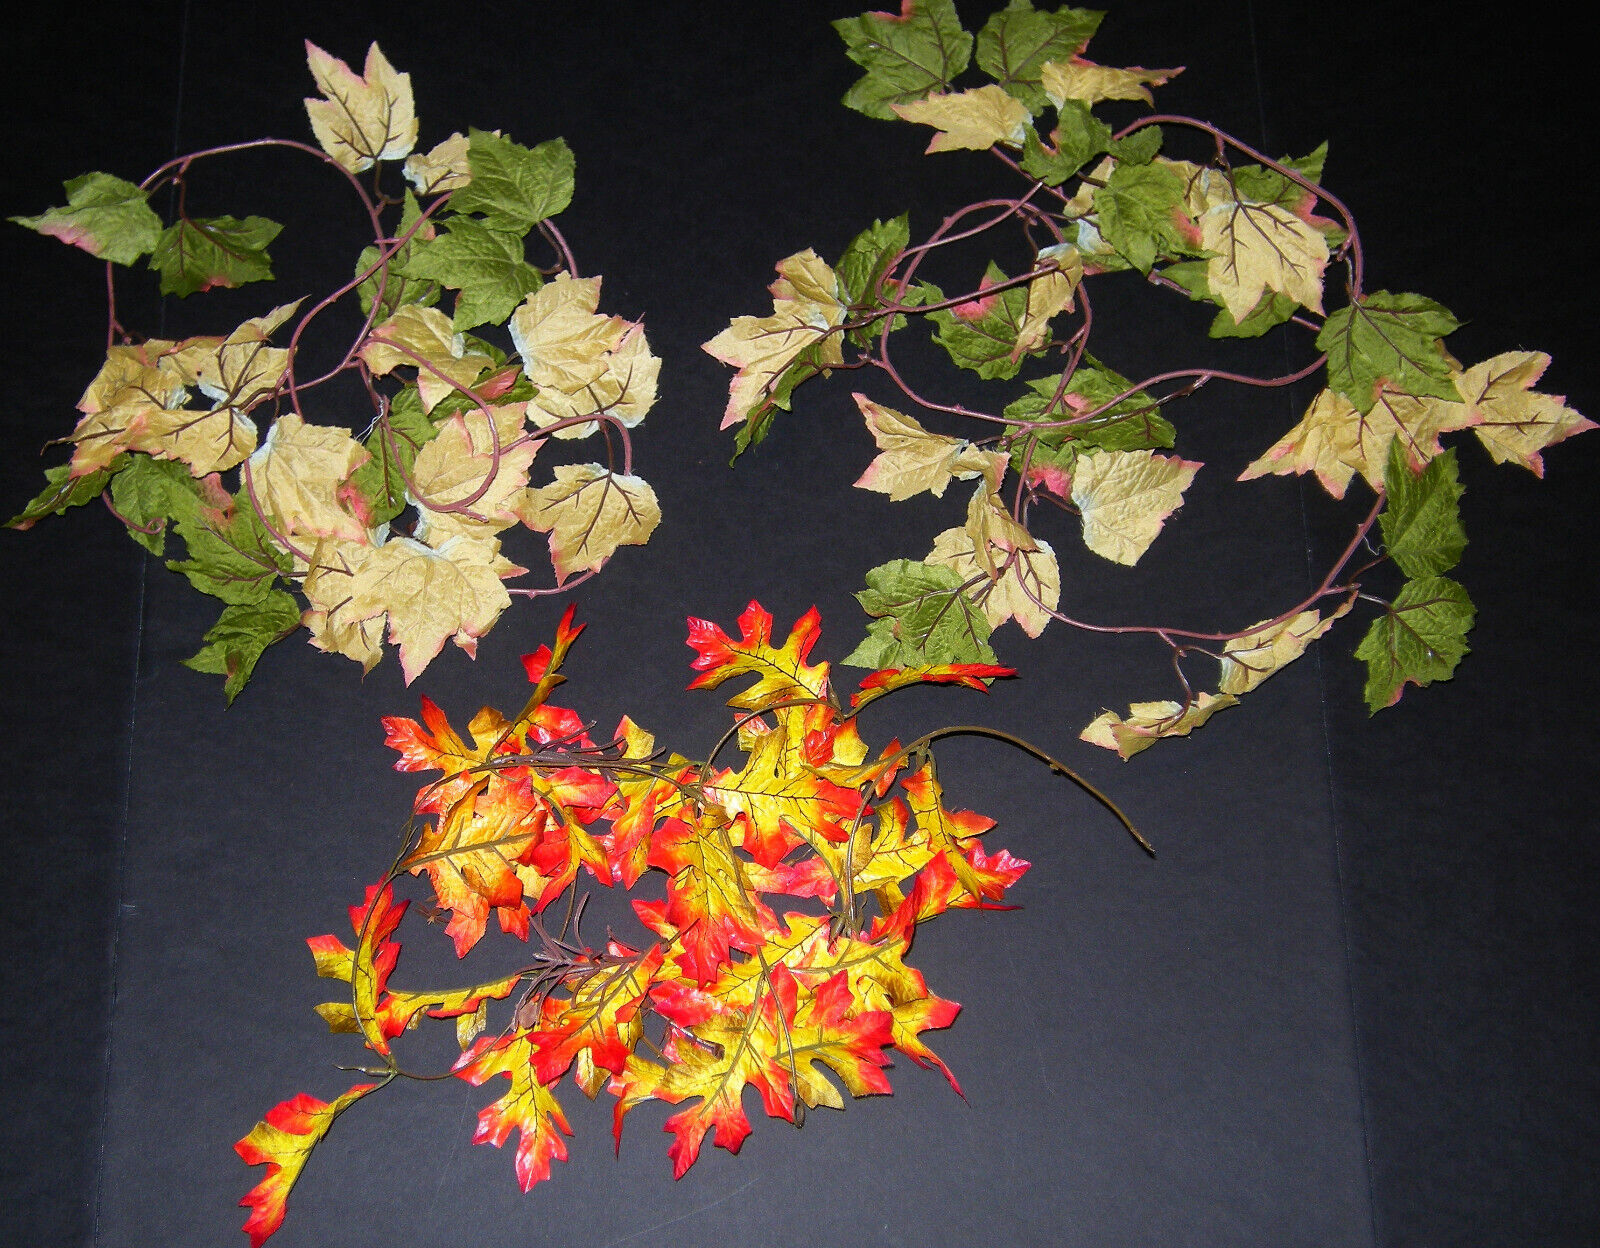 LOT OF 3 ASSORTED 6' FOOT LONG AUTUMN FALL FAUX ARTIFICIAL LEAF LEAVES GARLAND